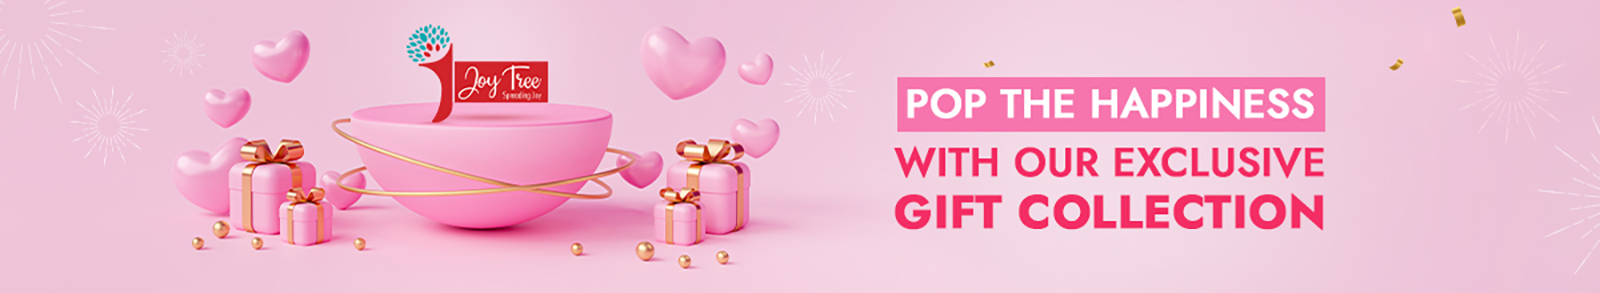 Pop the happiness with our exclusive gift collection